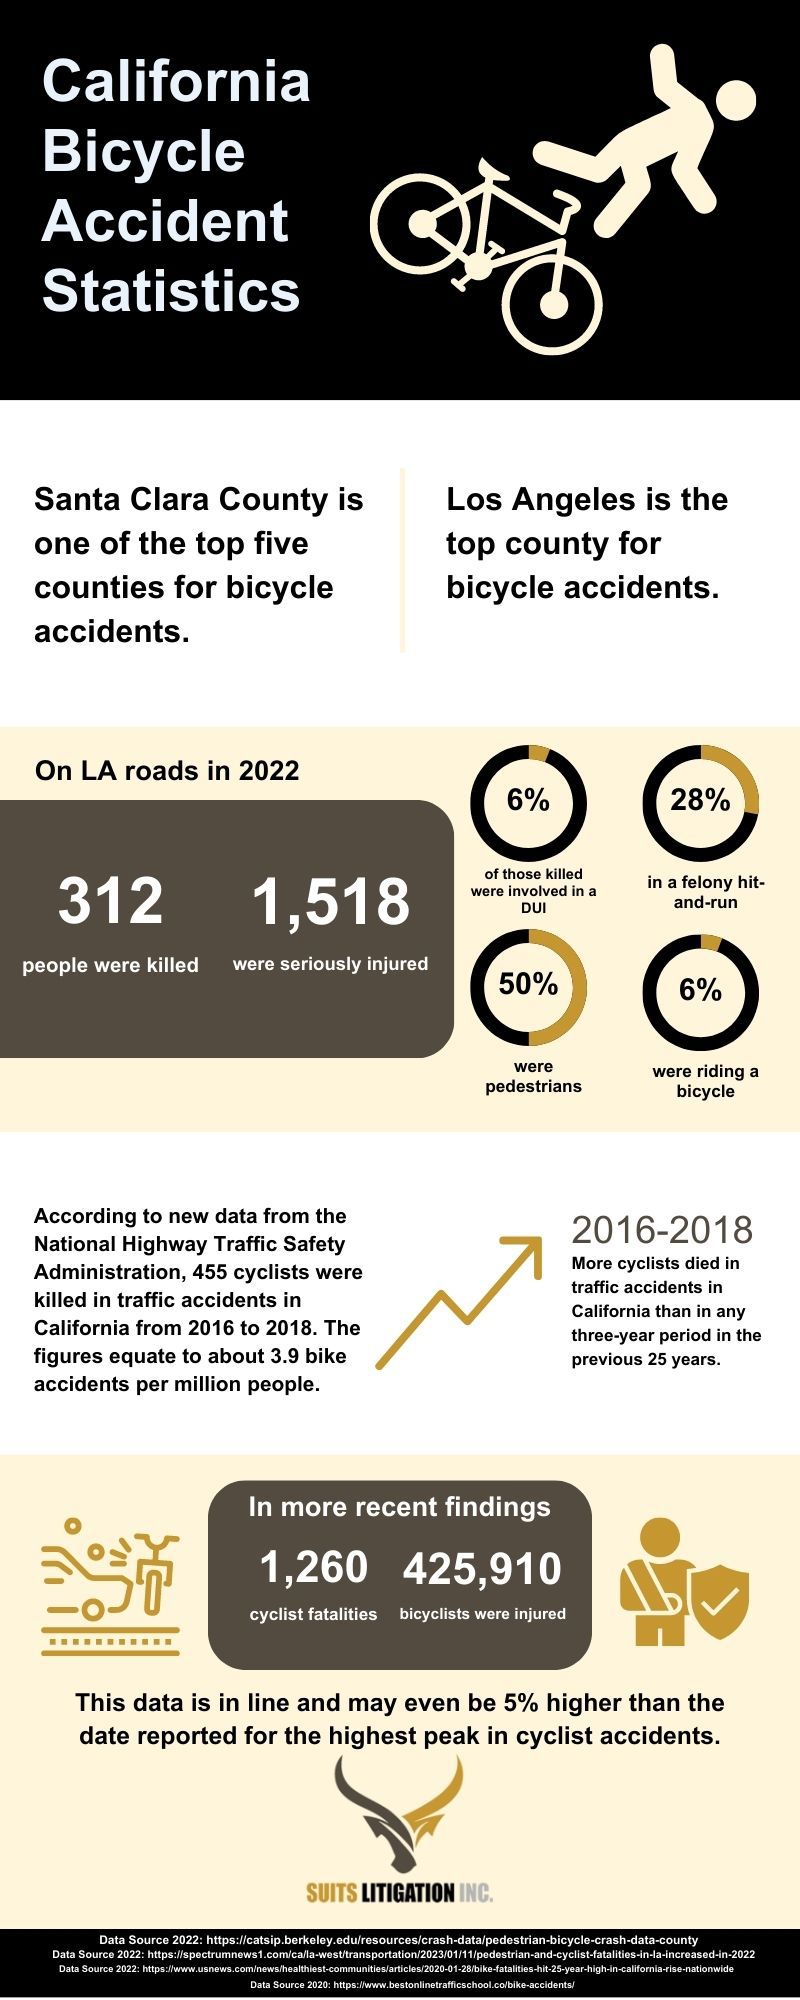 Suits-Litigation-California-Bicycle-Accident-Statistics-Infographic-NEW